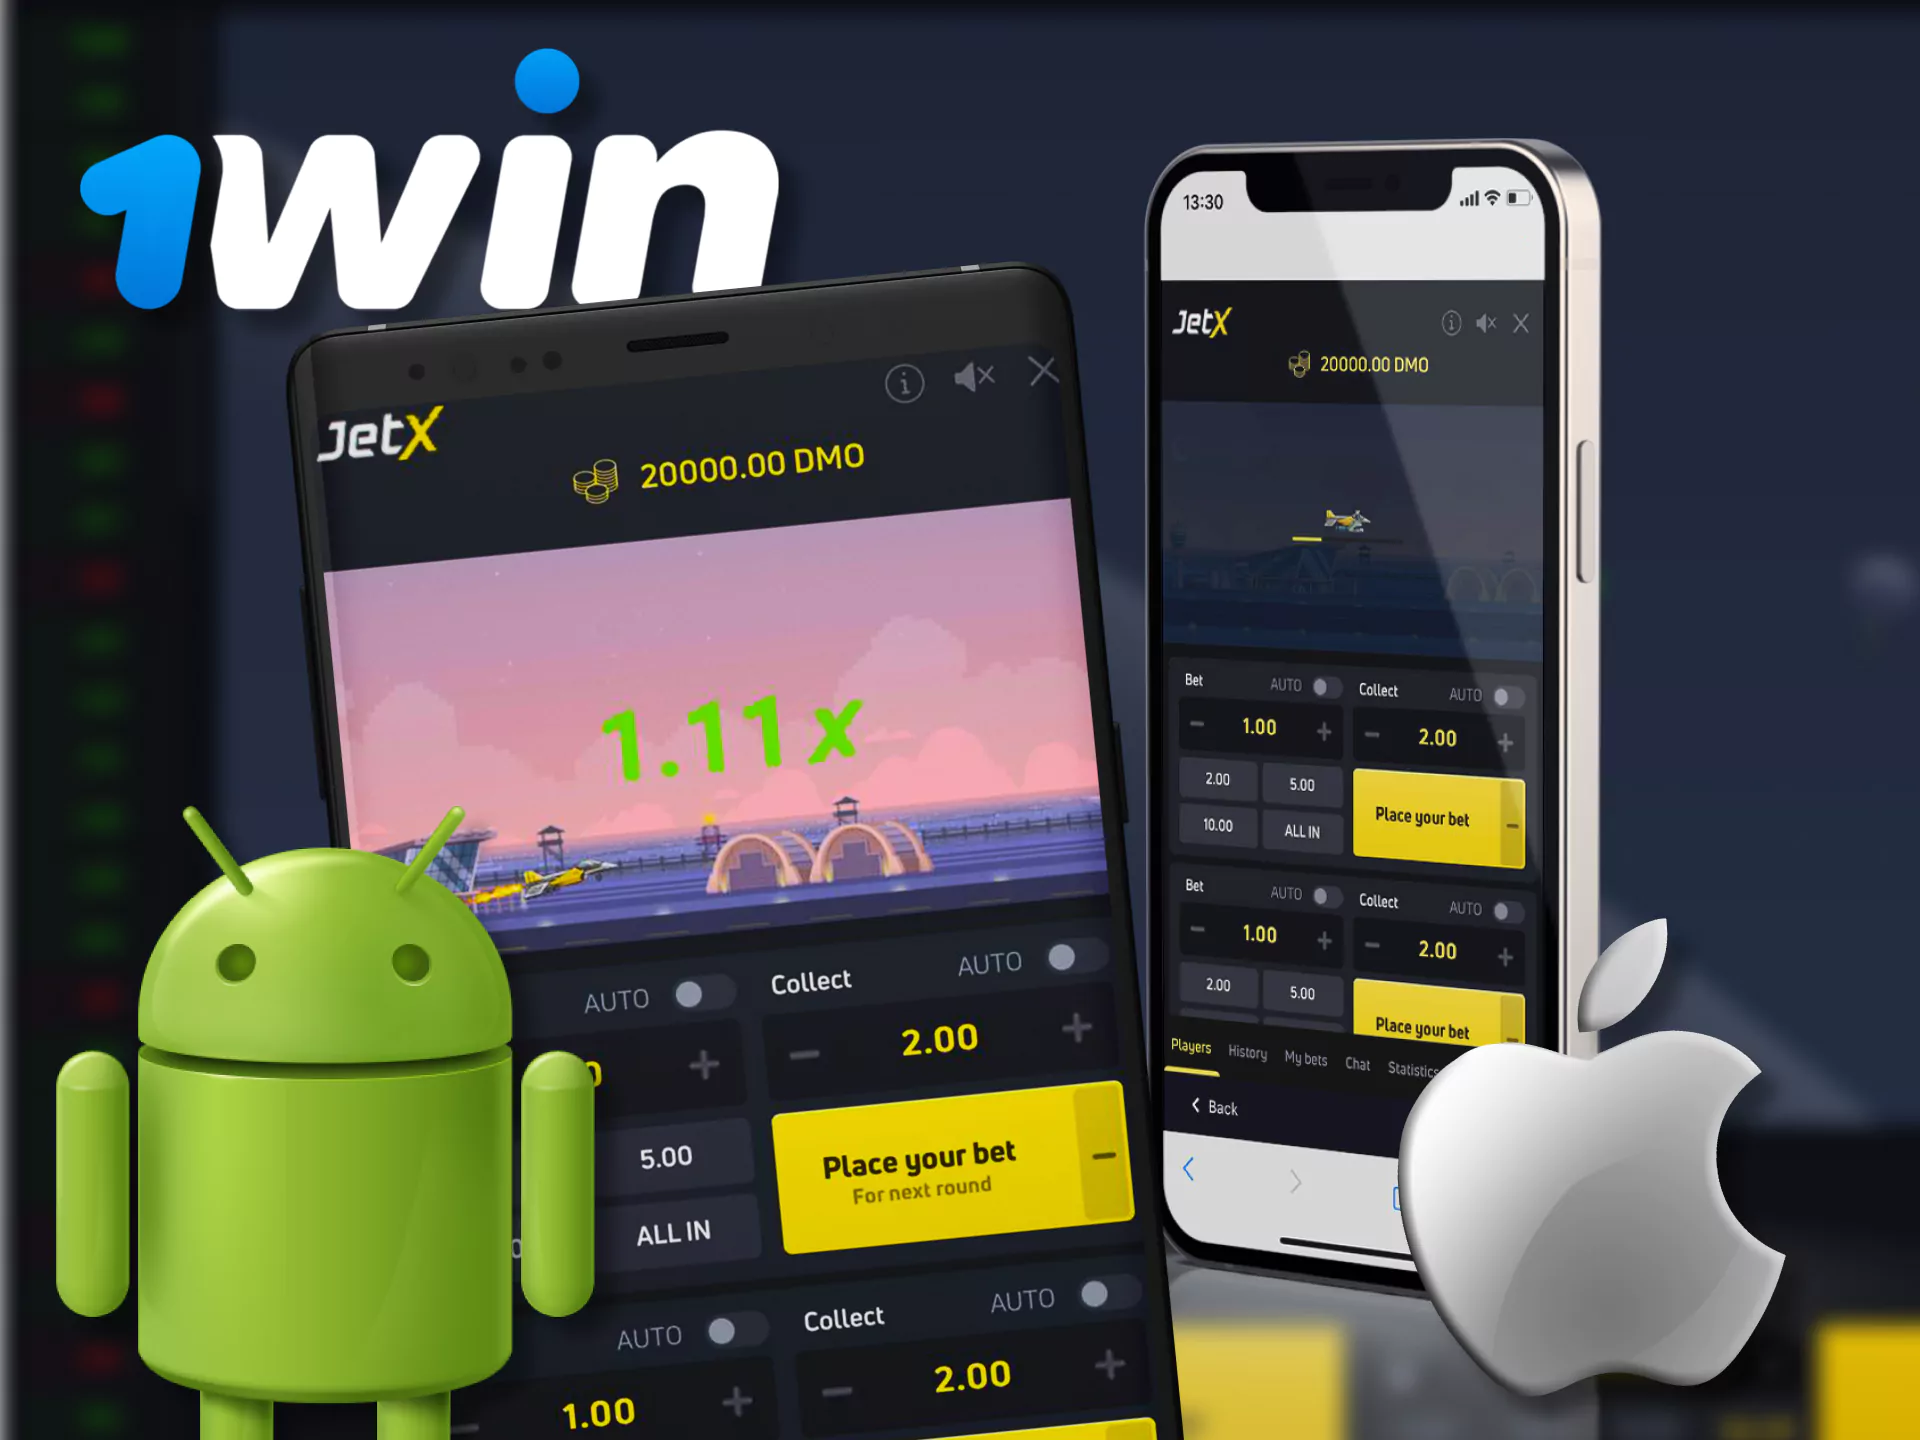 At 1Win, you can bet on JetX directly from your phone through the app.